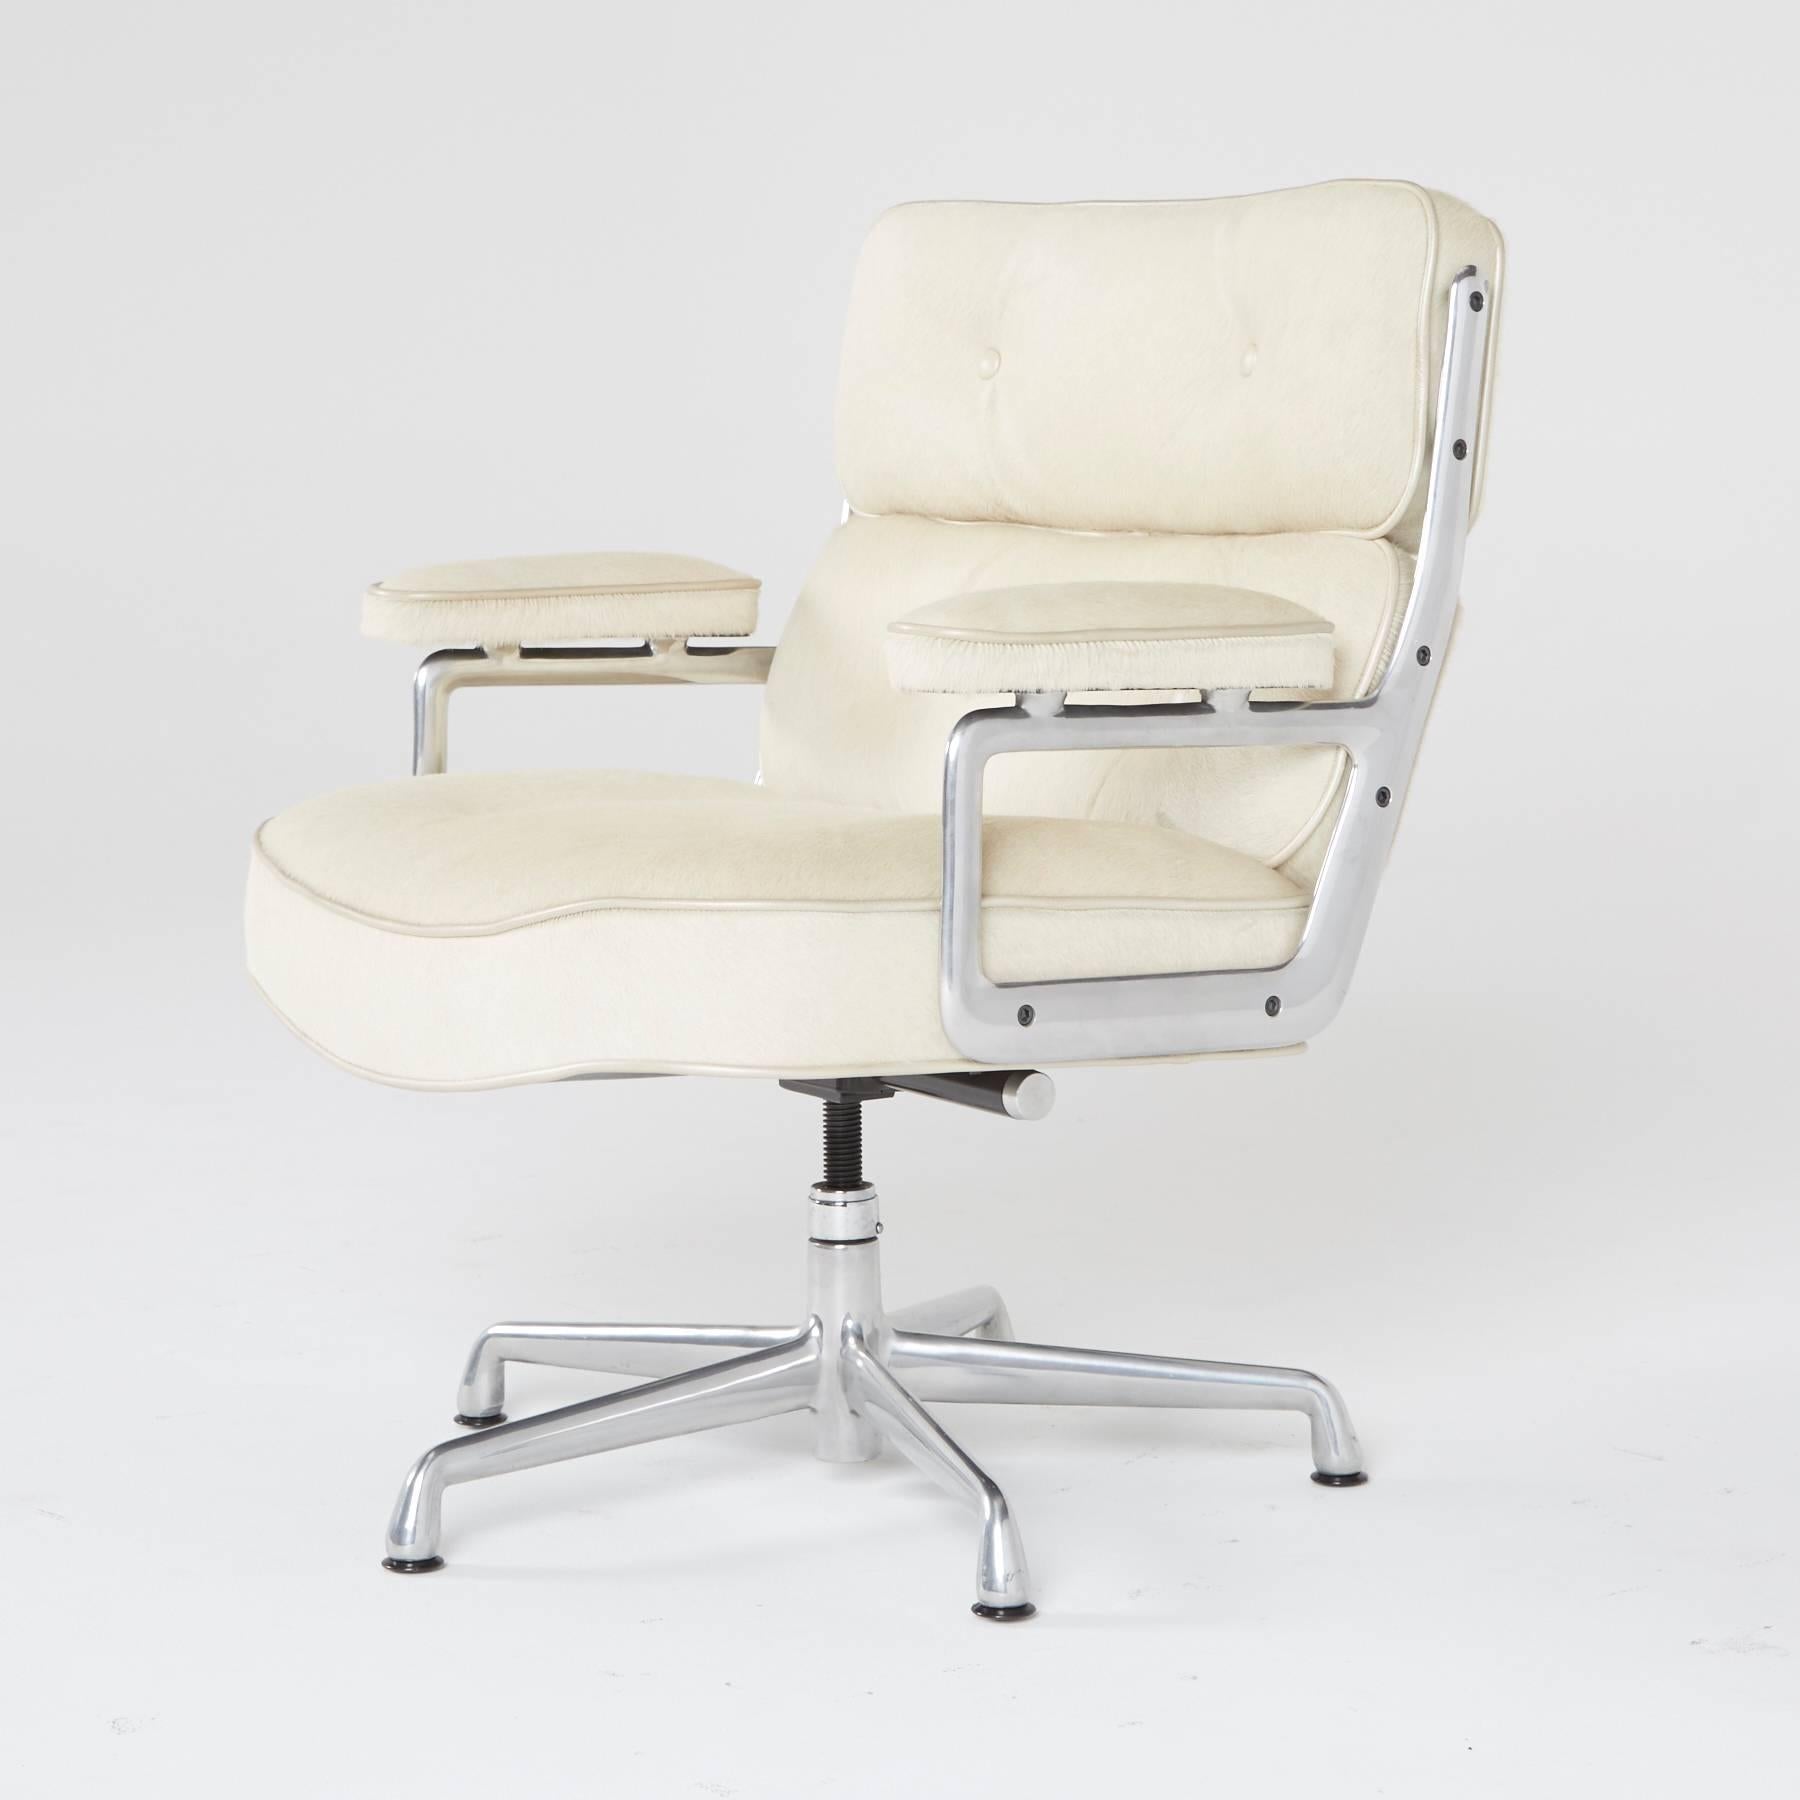 Designed by Charles Eames in 1959 for the Time Life building in New York City, this executive office chair hasn't budged from its role as the pinnacle of professional, "Mad Men" style.

This is the "lobby chair" version which has